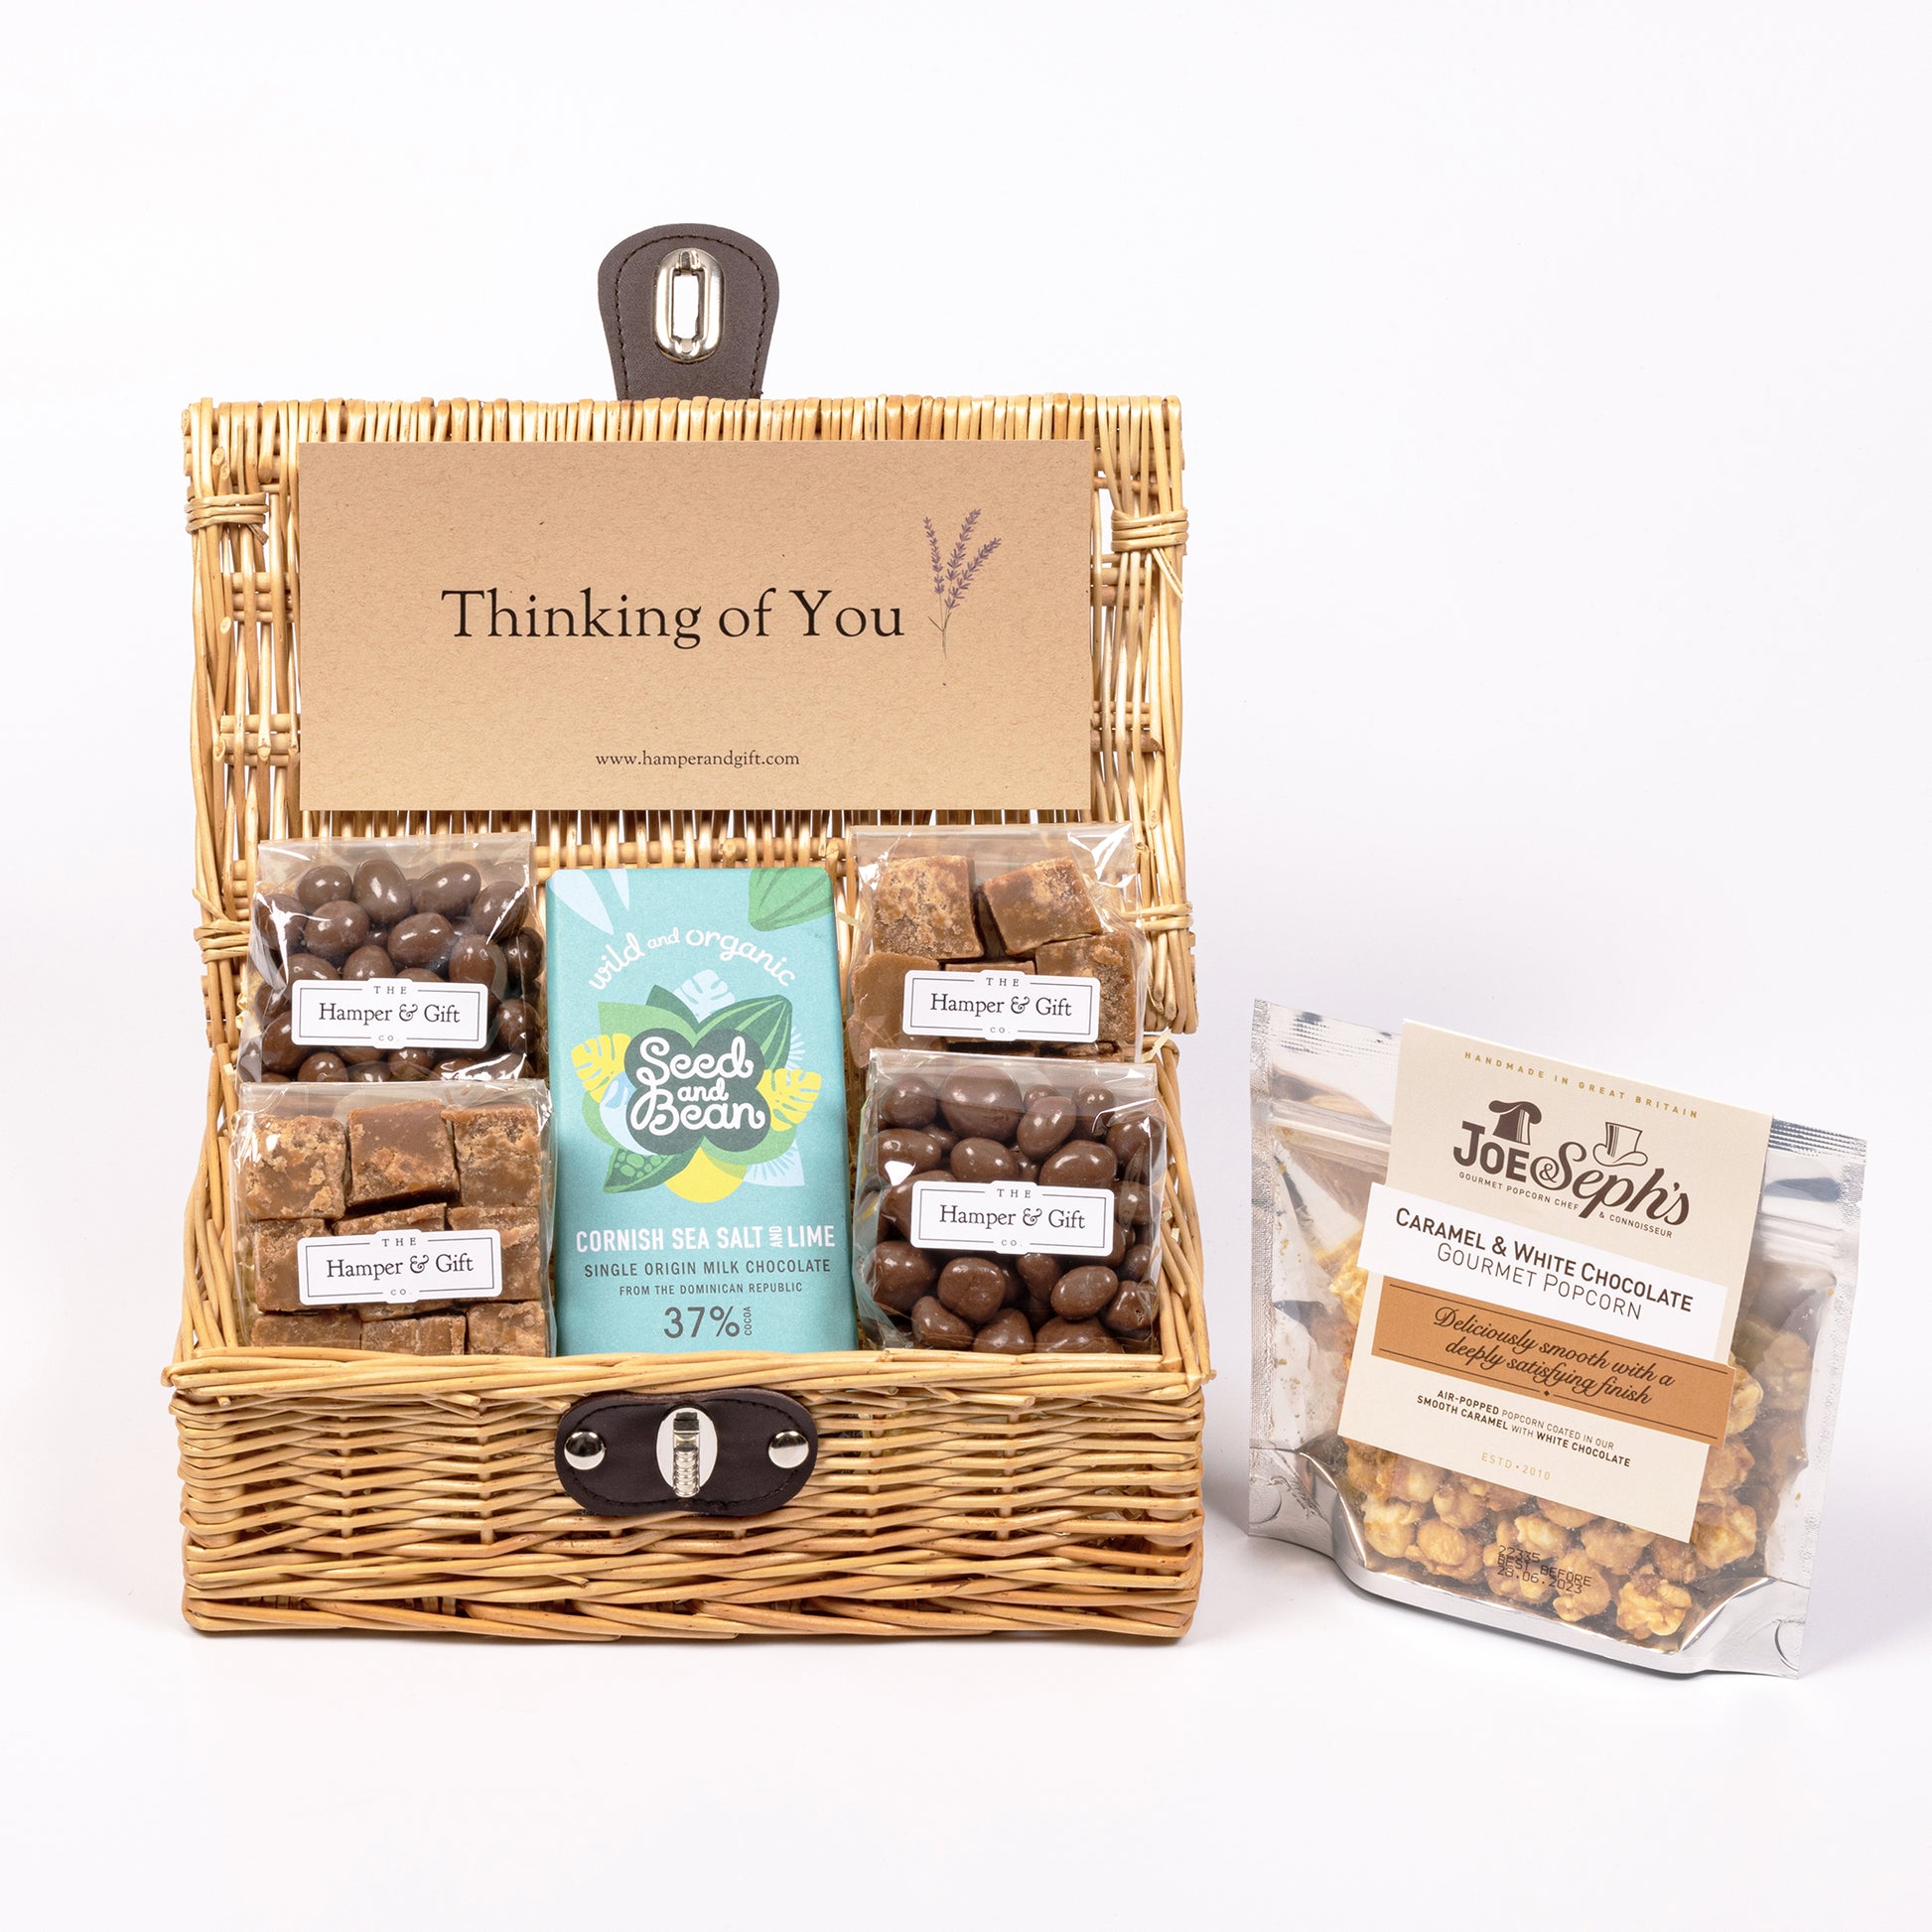 Thinking of You Hamper filled with chocolate, fudge and gourmet popcorn